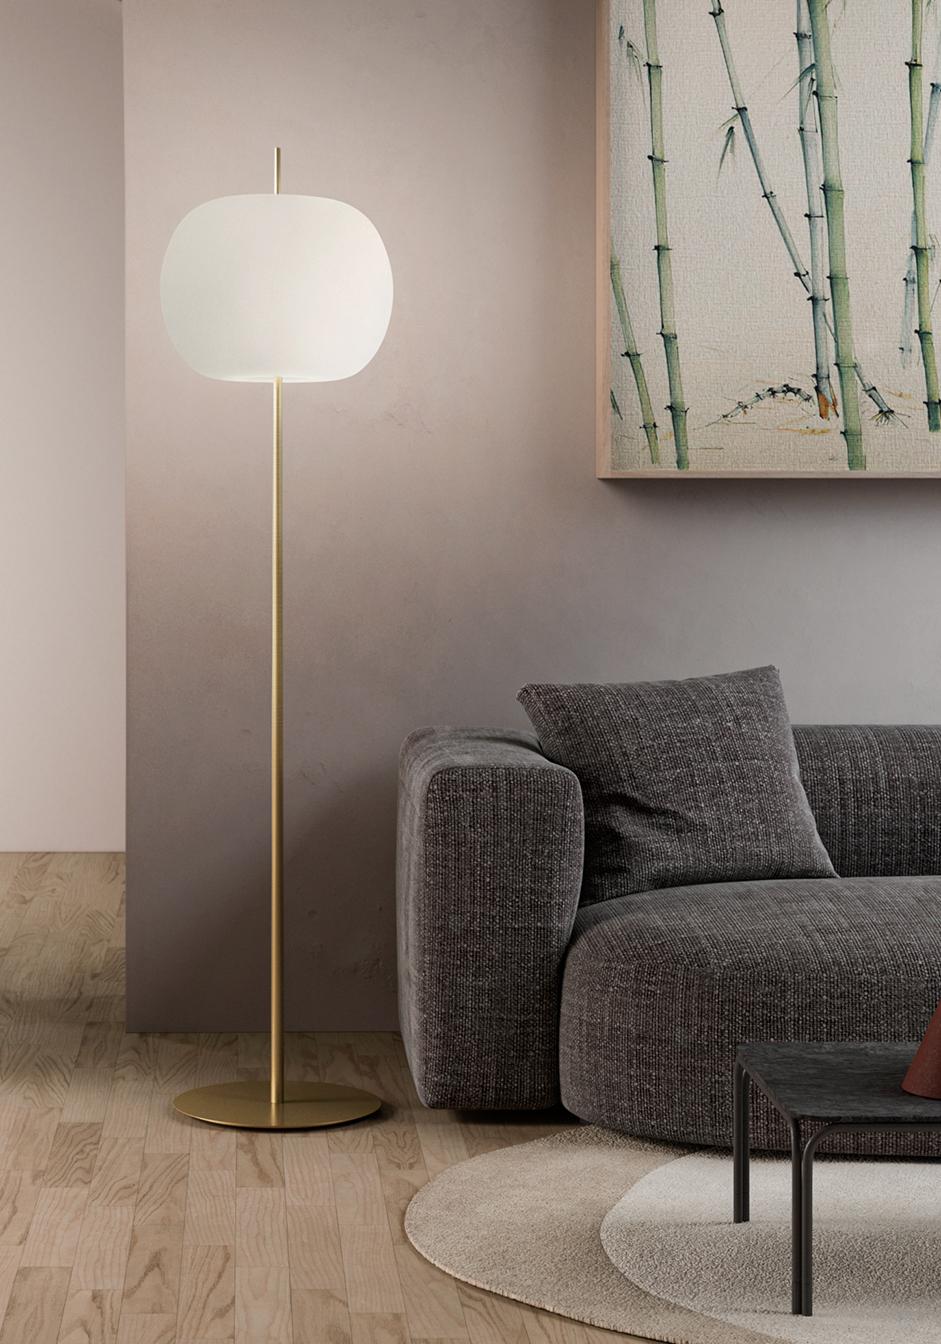 'Kushi XL' opaline glass and copper floor lamp for KDLN.

Executed in mouth-blown double layer opaline glass with a metallic body available in three coating finishes: black, copper and brass. This minimalist yet graceful design features a delicate